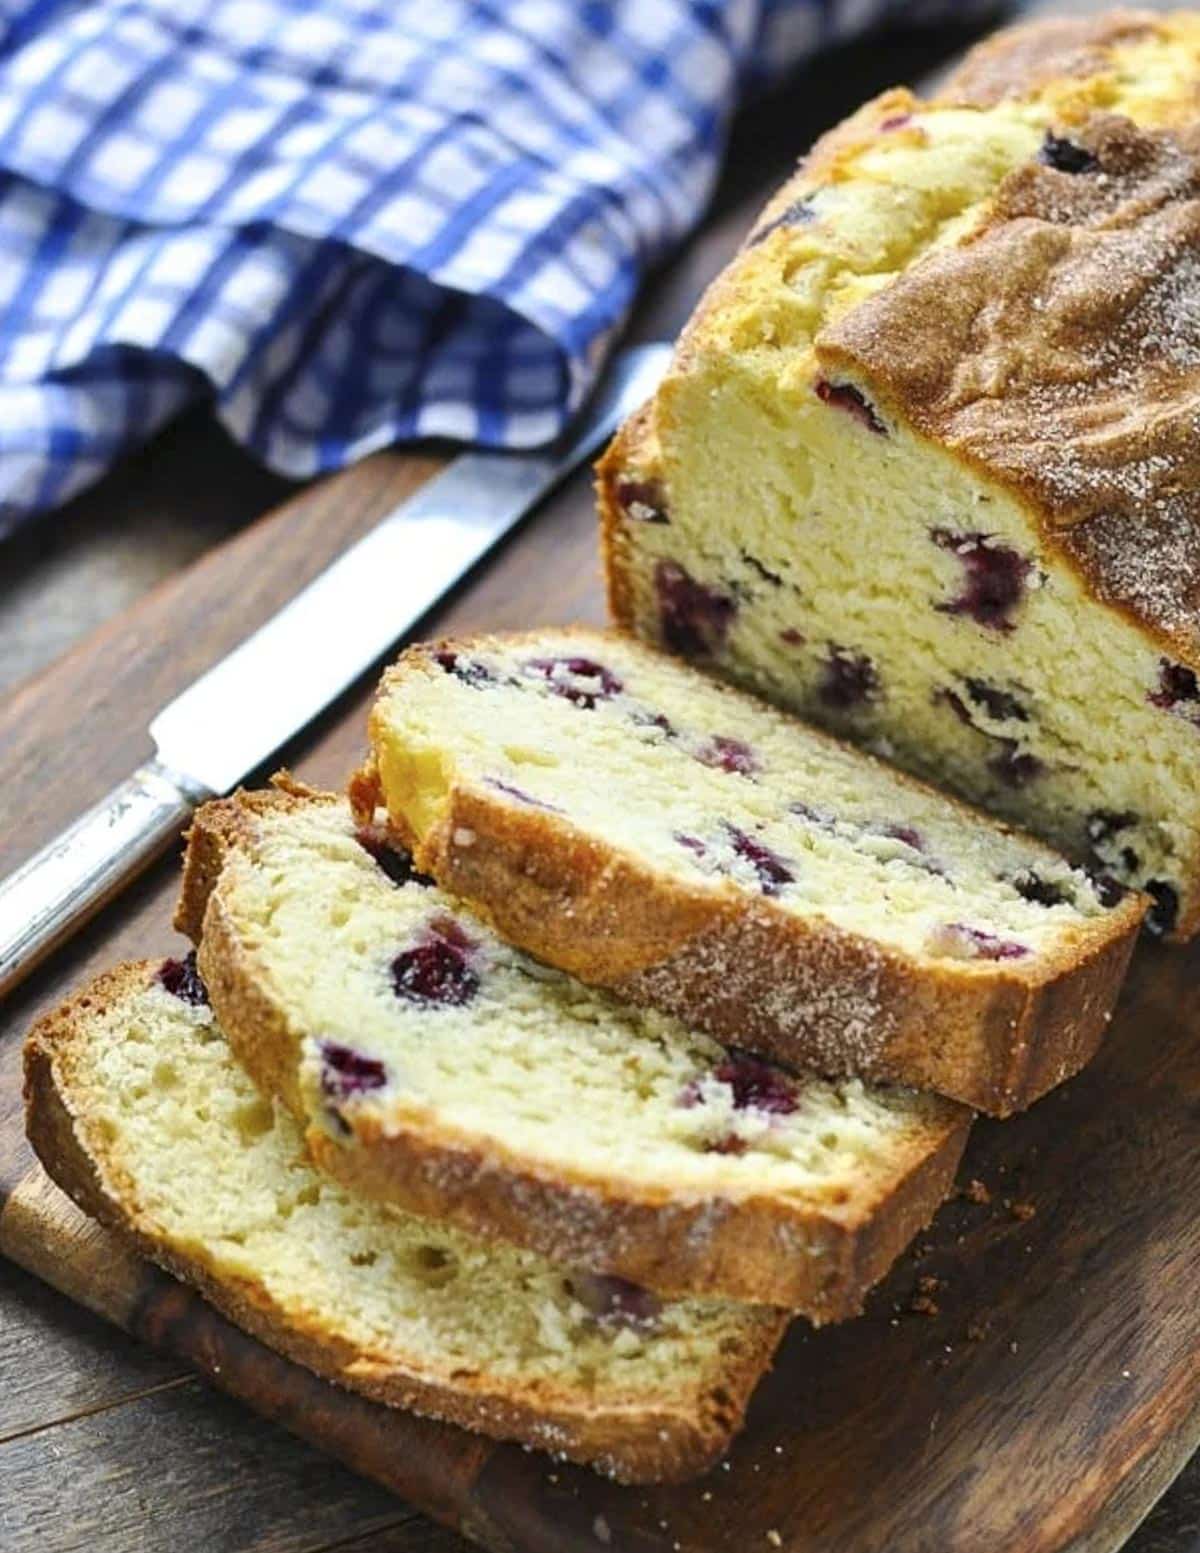 Sliced loaf of blueberry bread on a wooden cutting board.